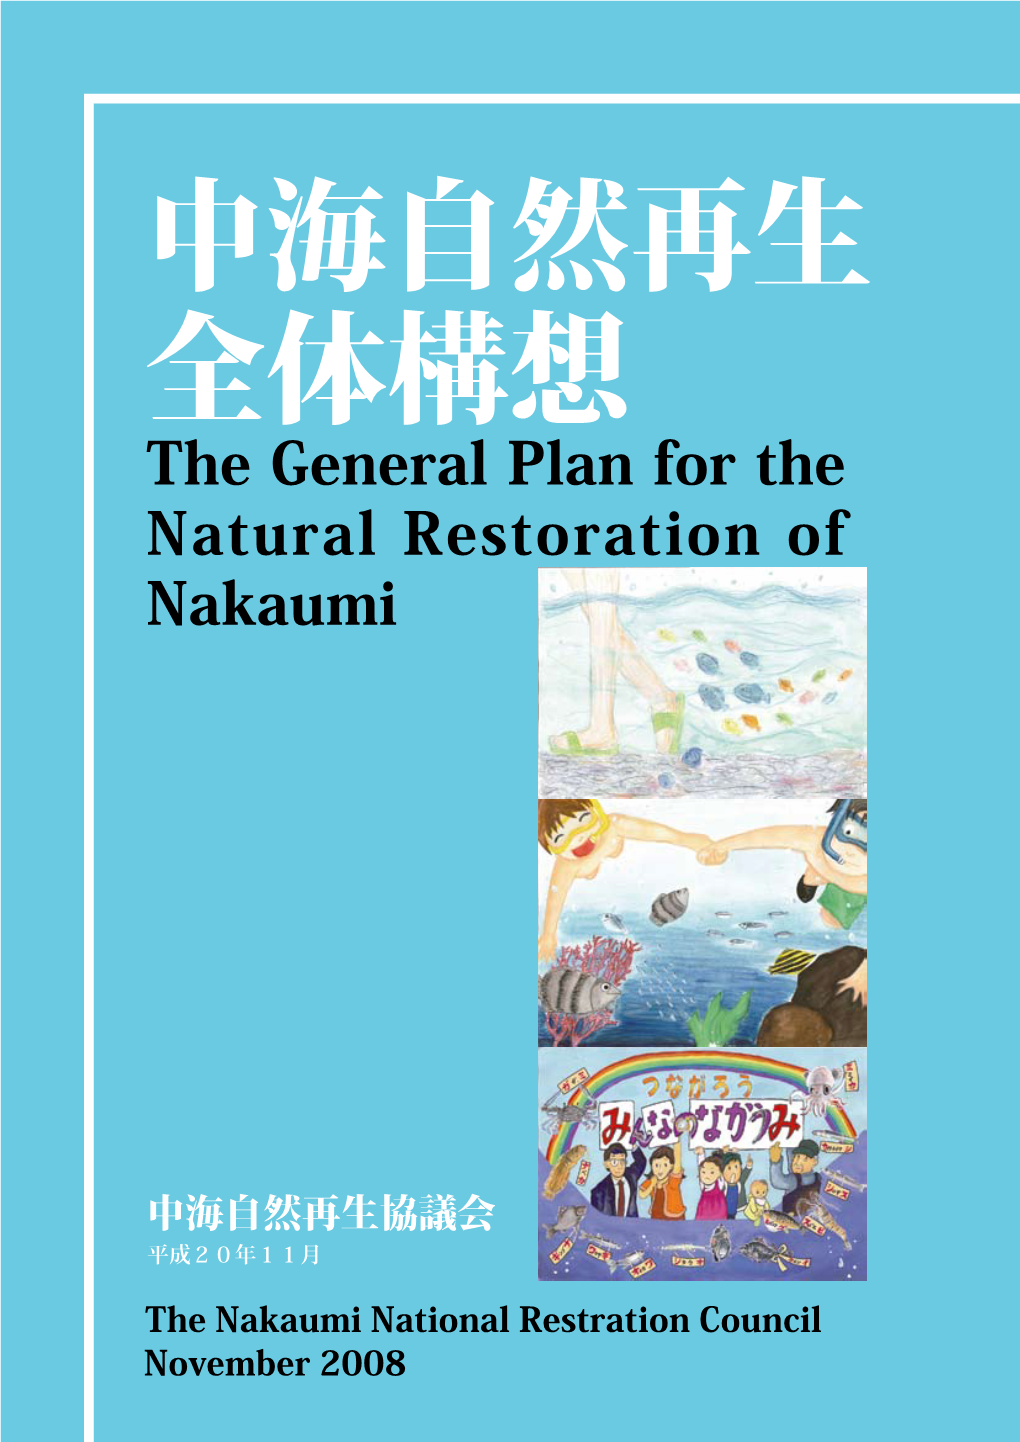 The General Plan for the Natural Restoration of Nakaumi